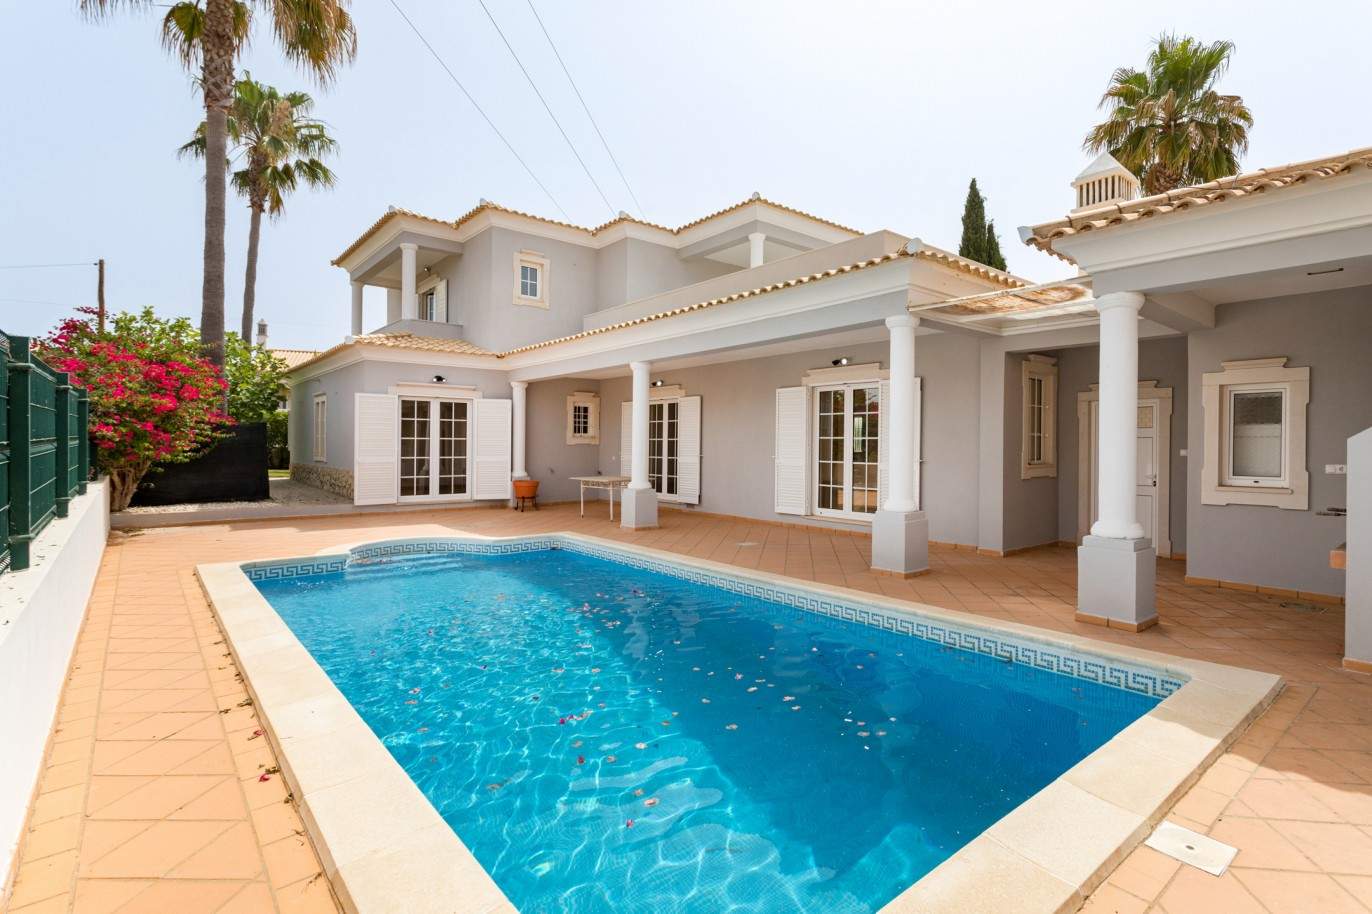 4 Bedroom Villa with swimming pool, for sale in Quarteira, Algarve_201731